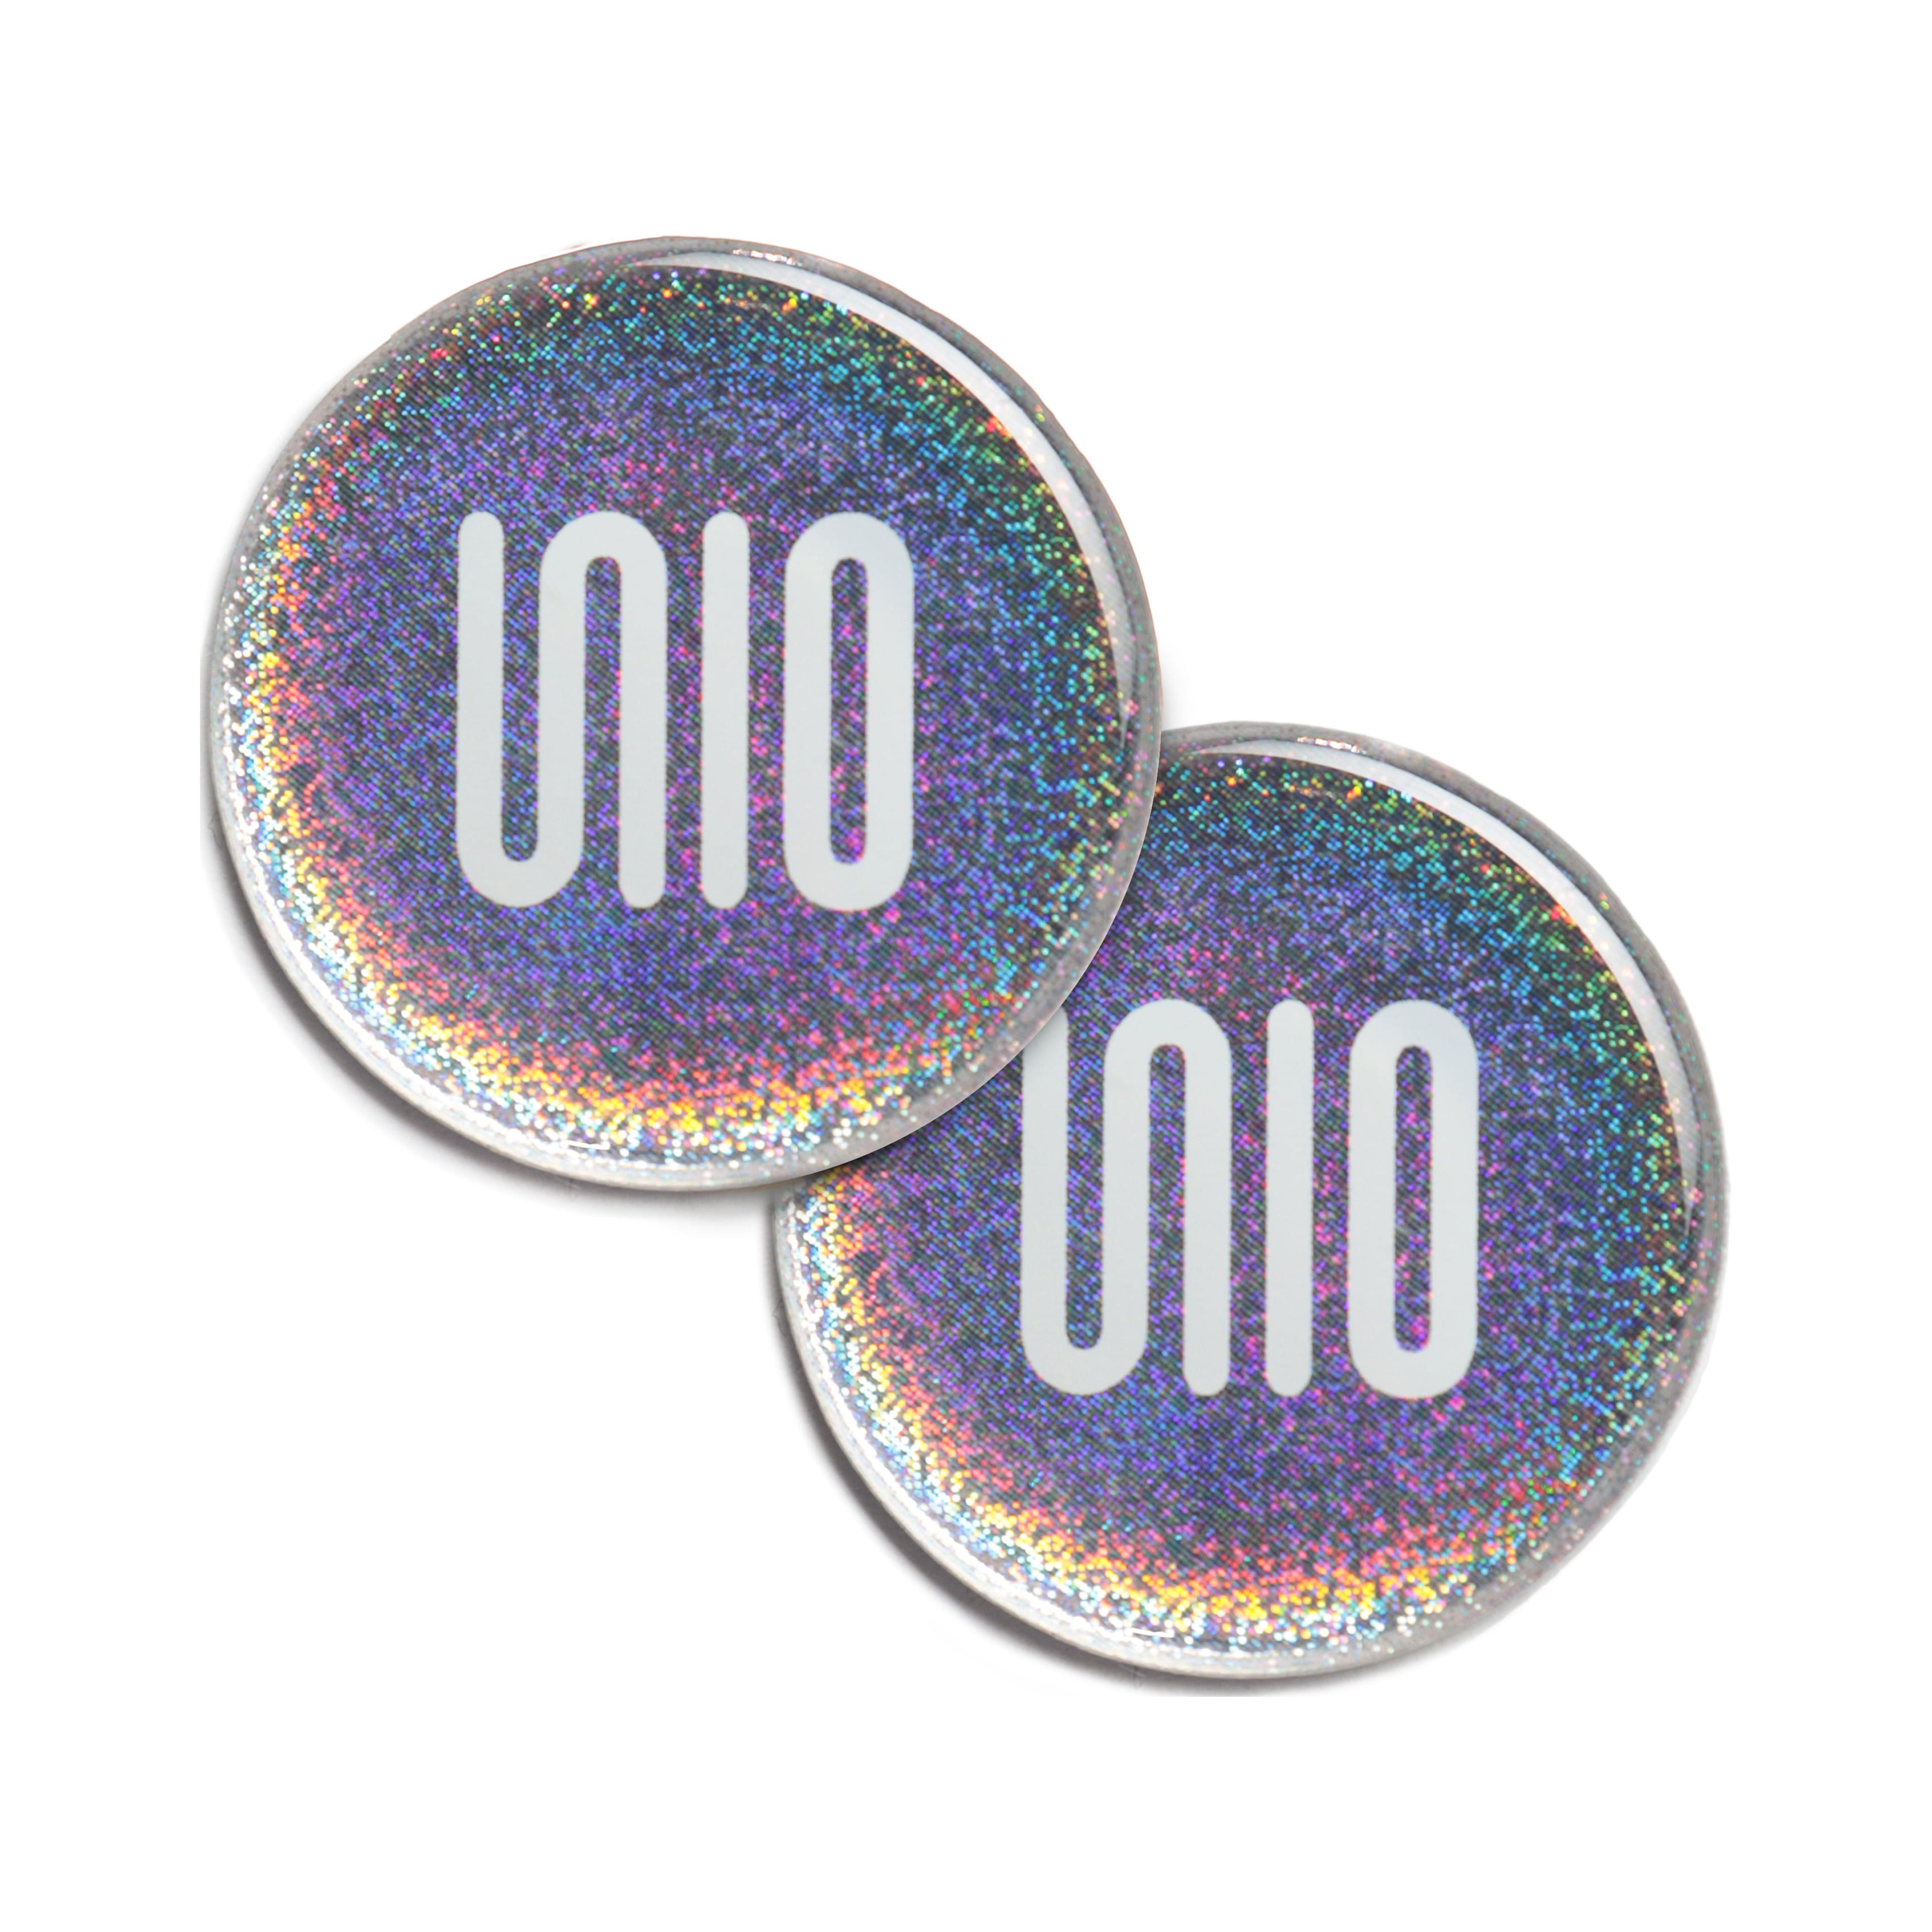 Unio NFC Tag, Digital Information Sharing and Phone Accessory, Glitter (2 Pack), Size: Dia 1.18 in